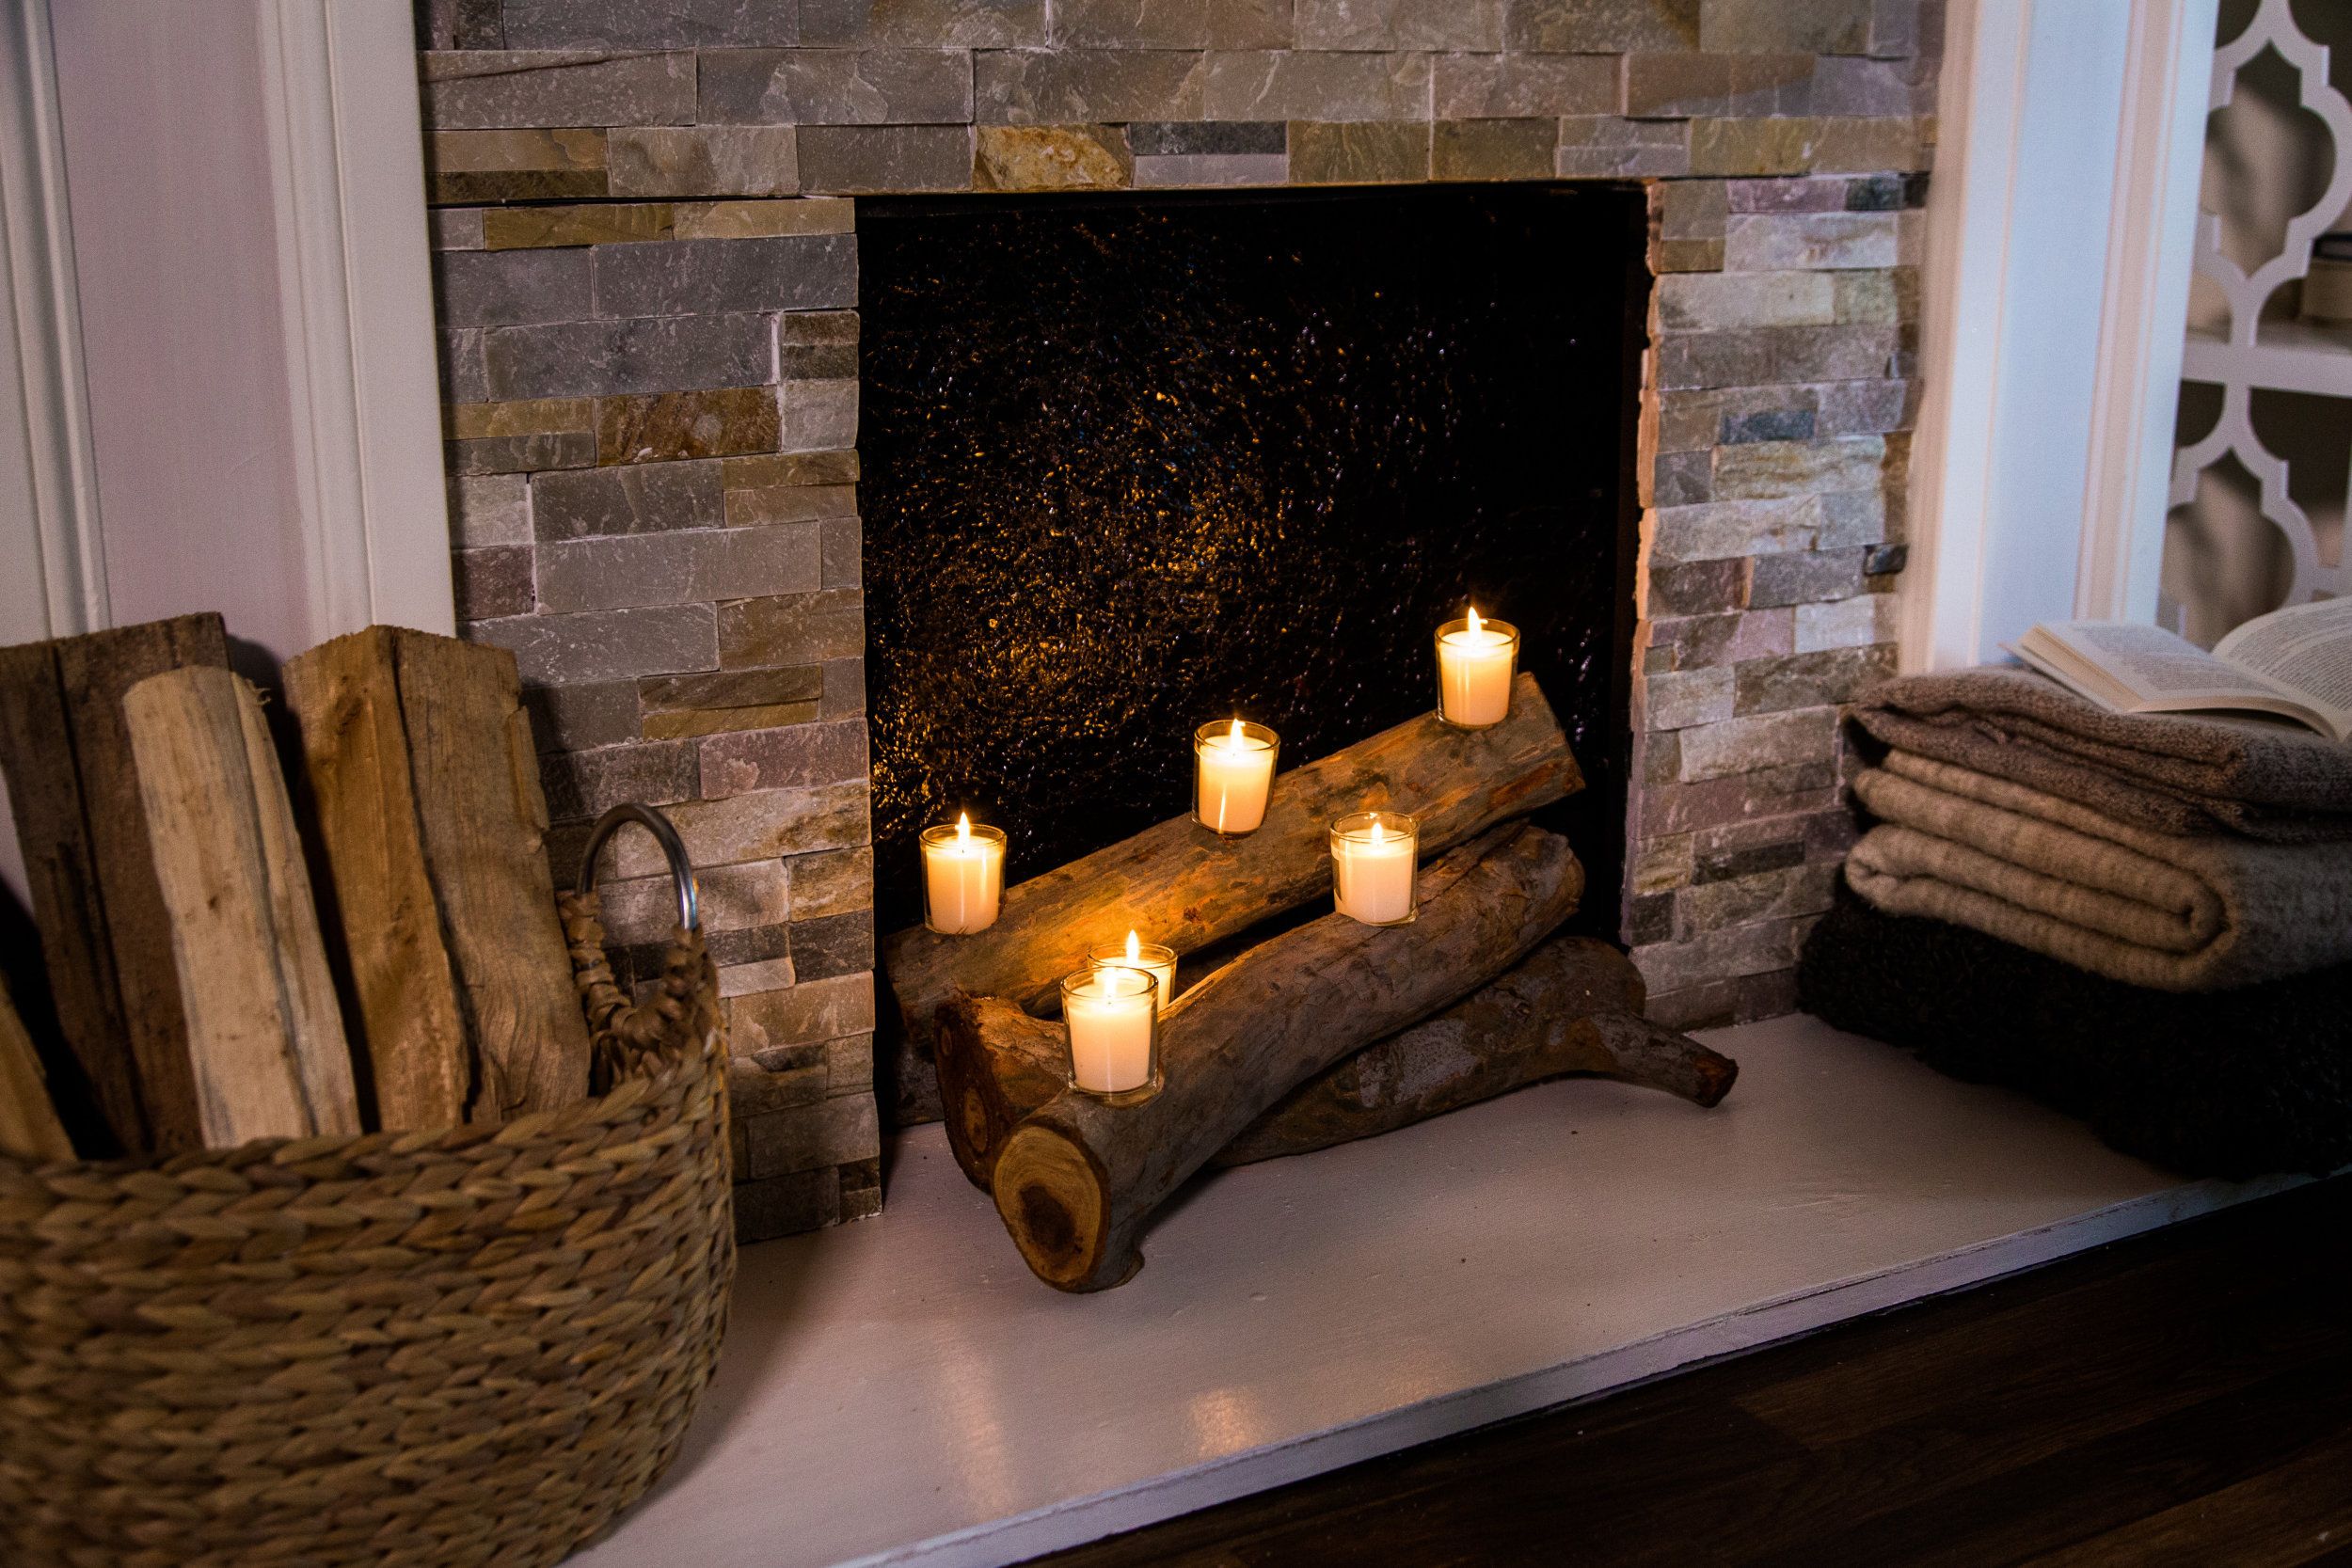 Fireplace Hearth Materials Luxury Diy Faux Fireplace Logs Home & Family